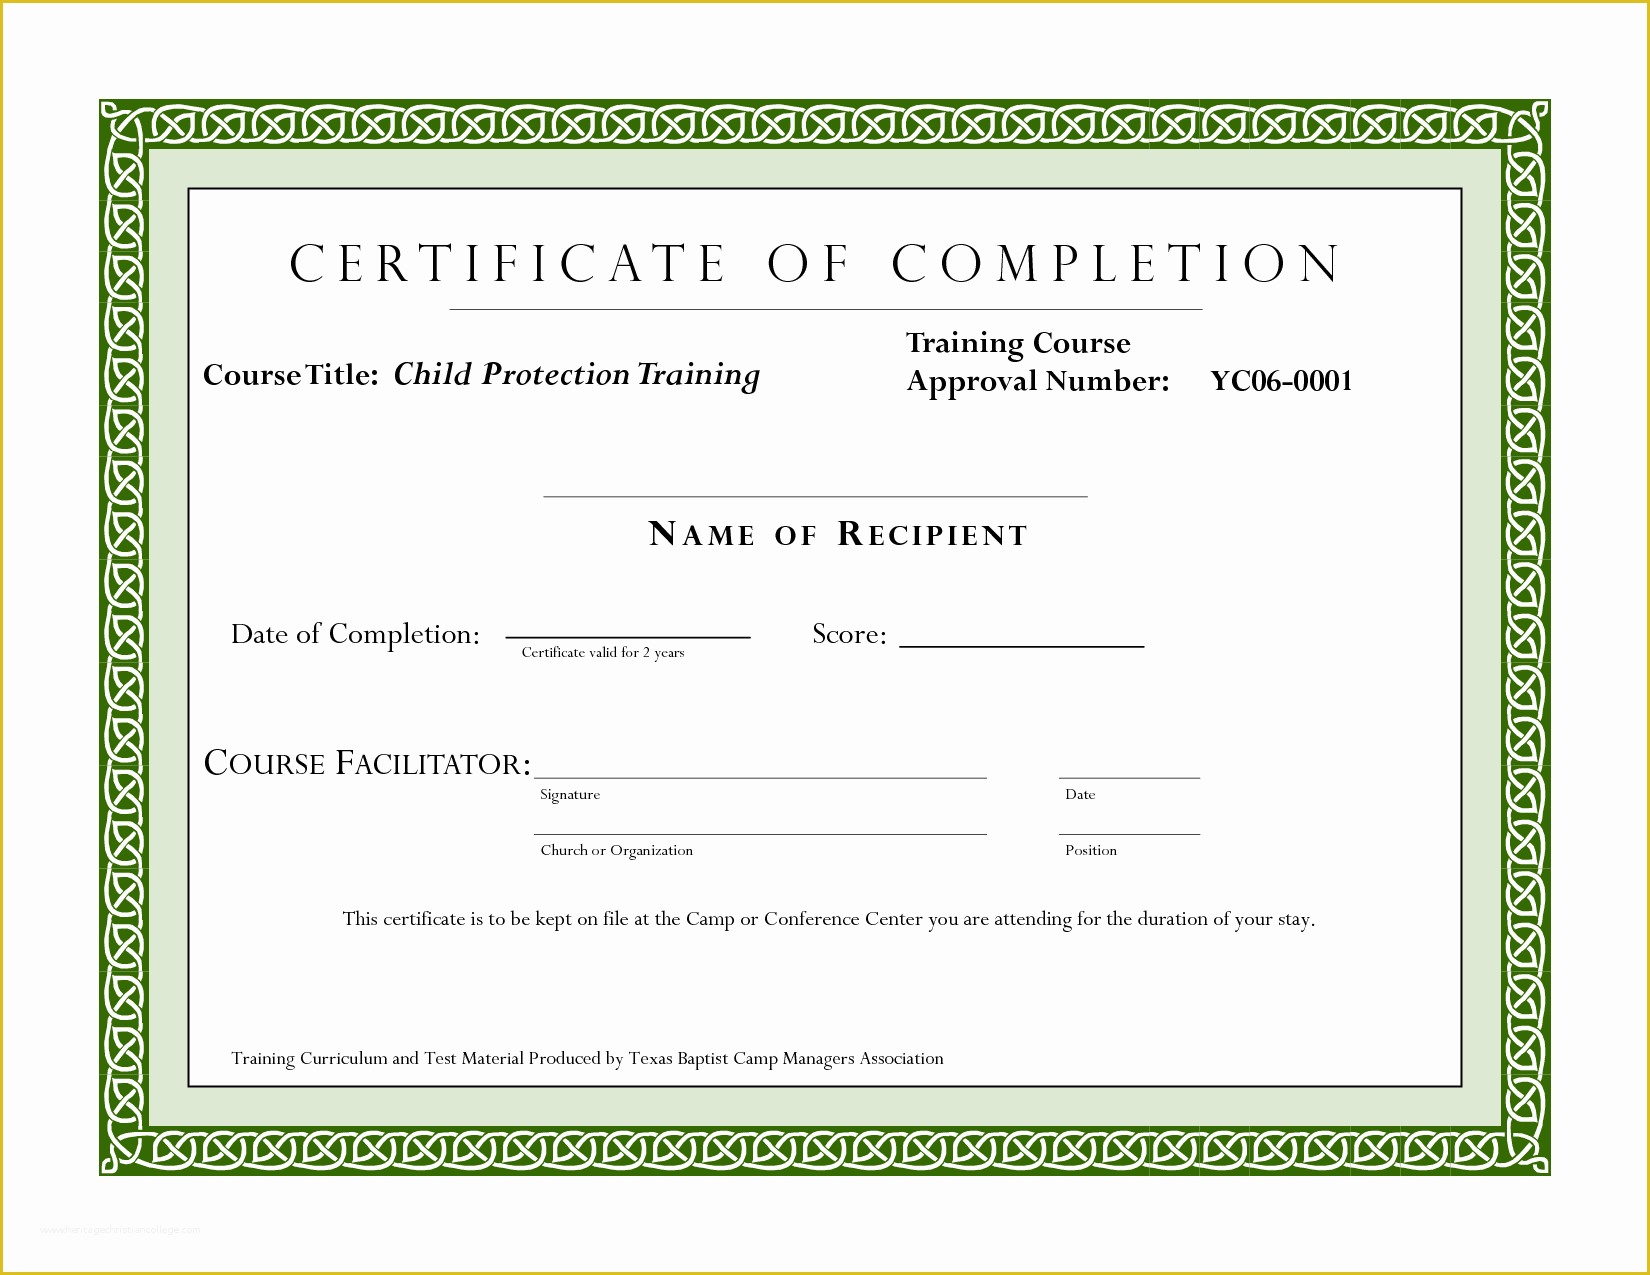 Certificate Of Completion Template Free Of Course Pletion Certificate Template